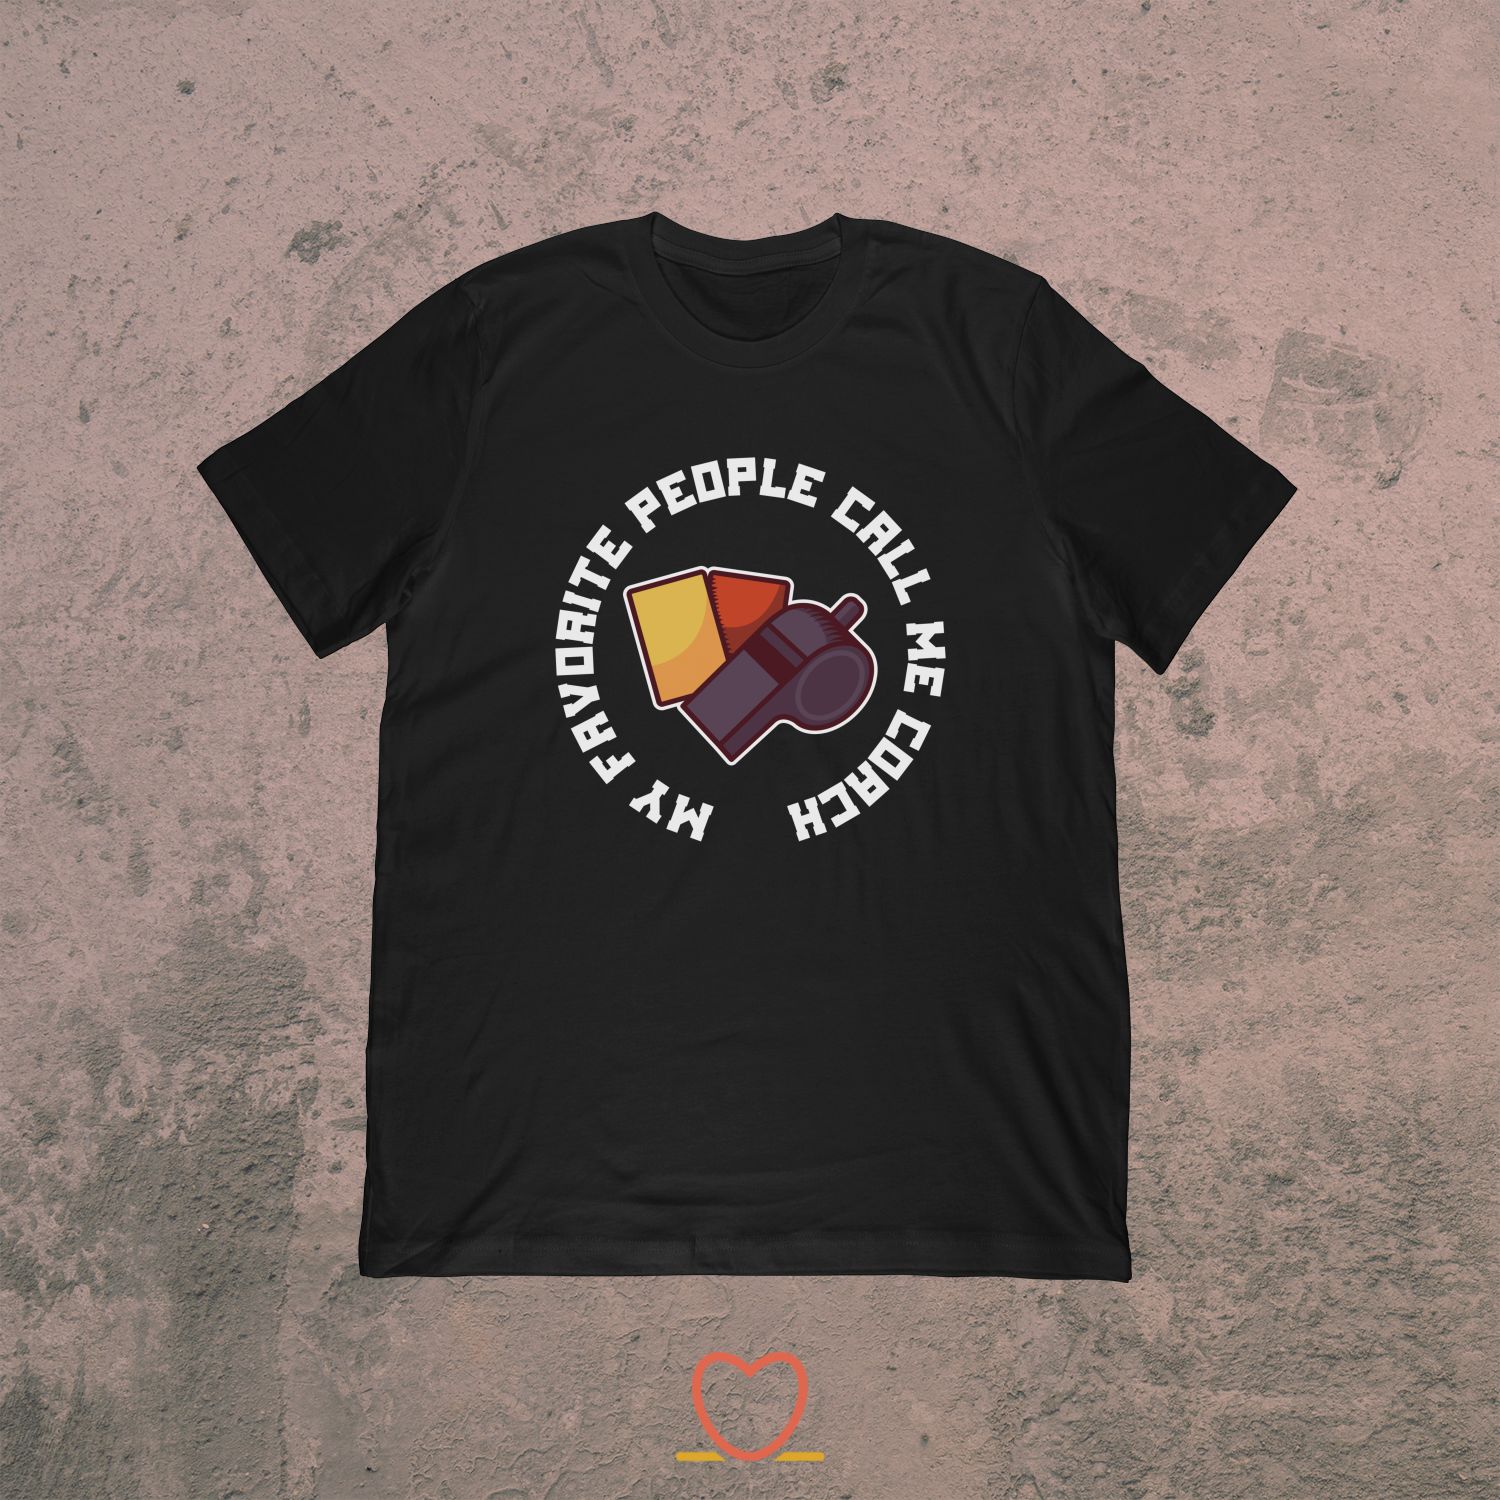 My Favorite People Call Me Coach – Soccer Coach Tee